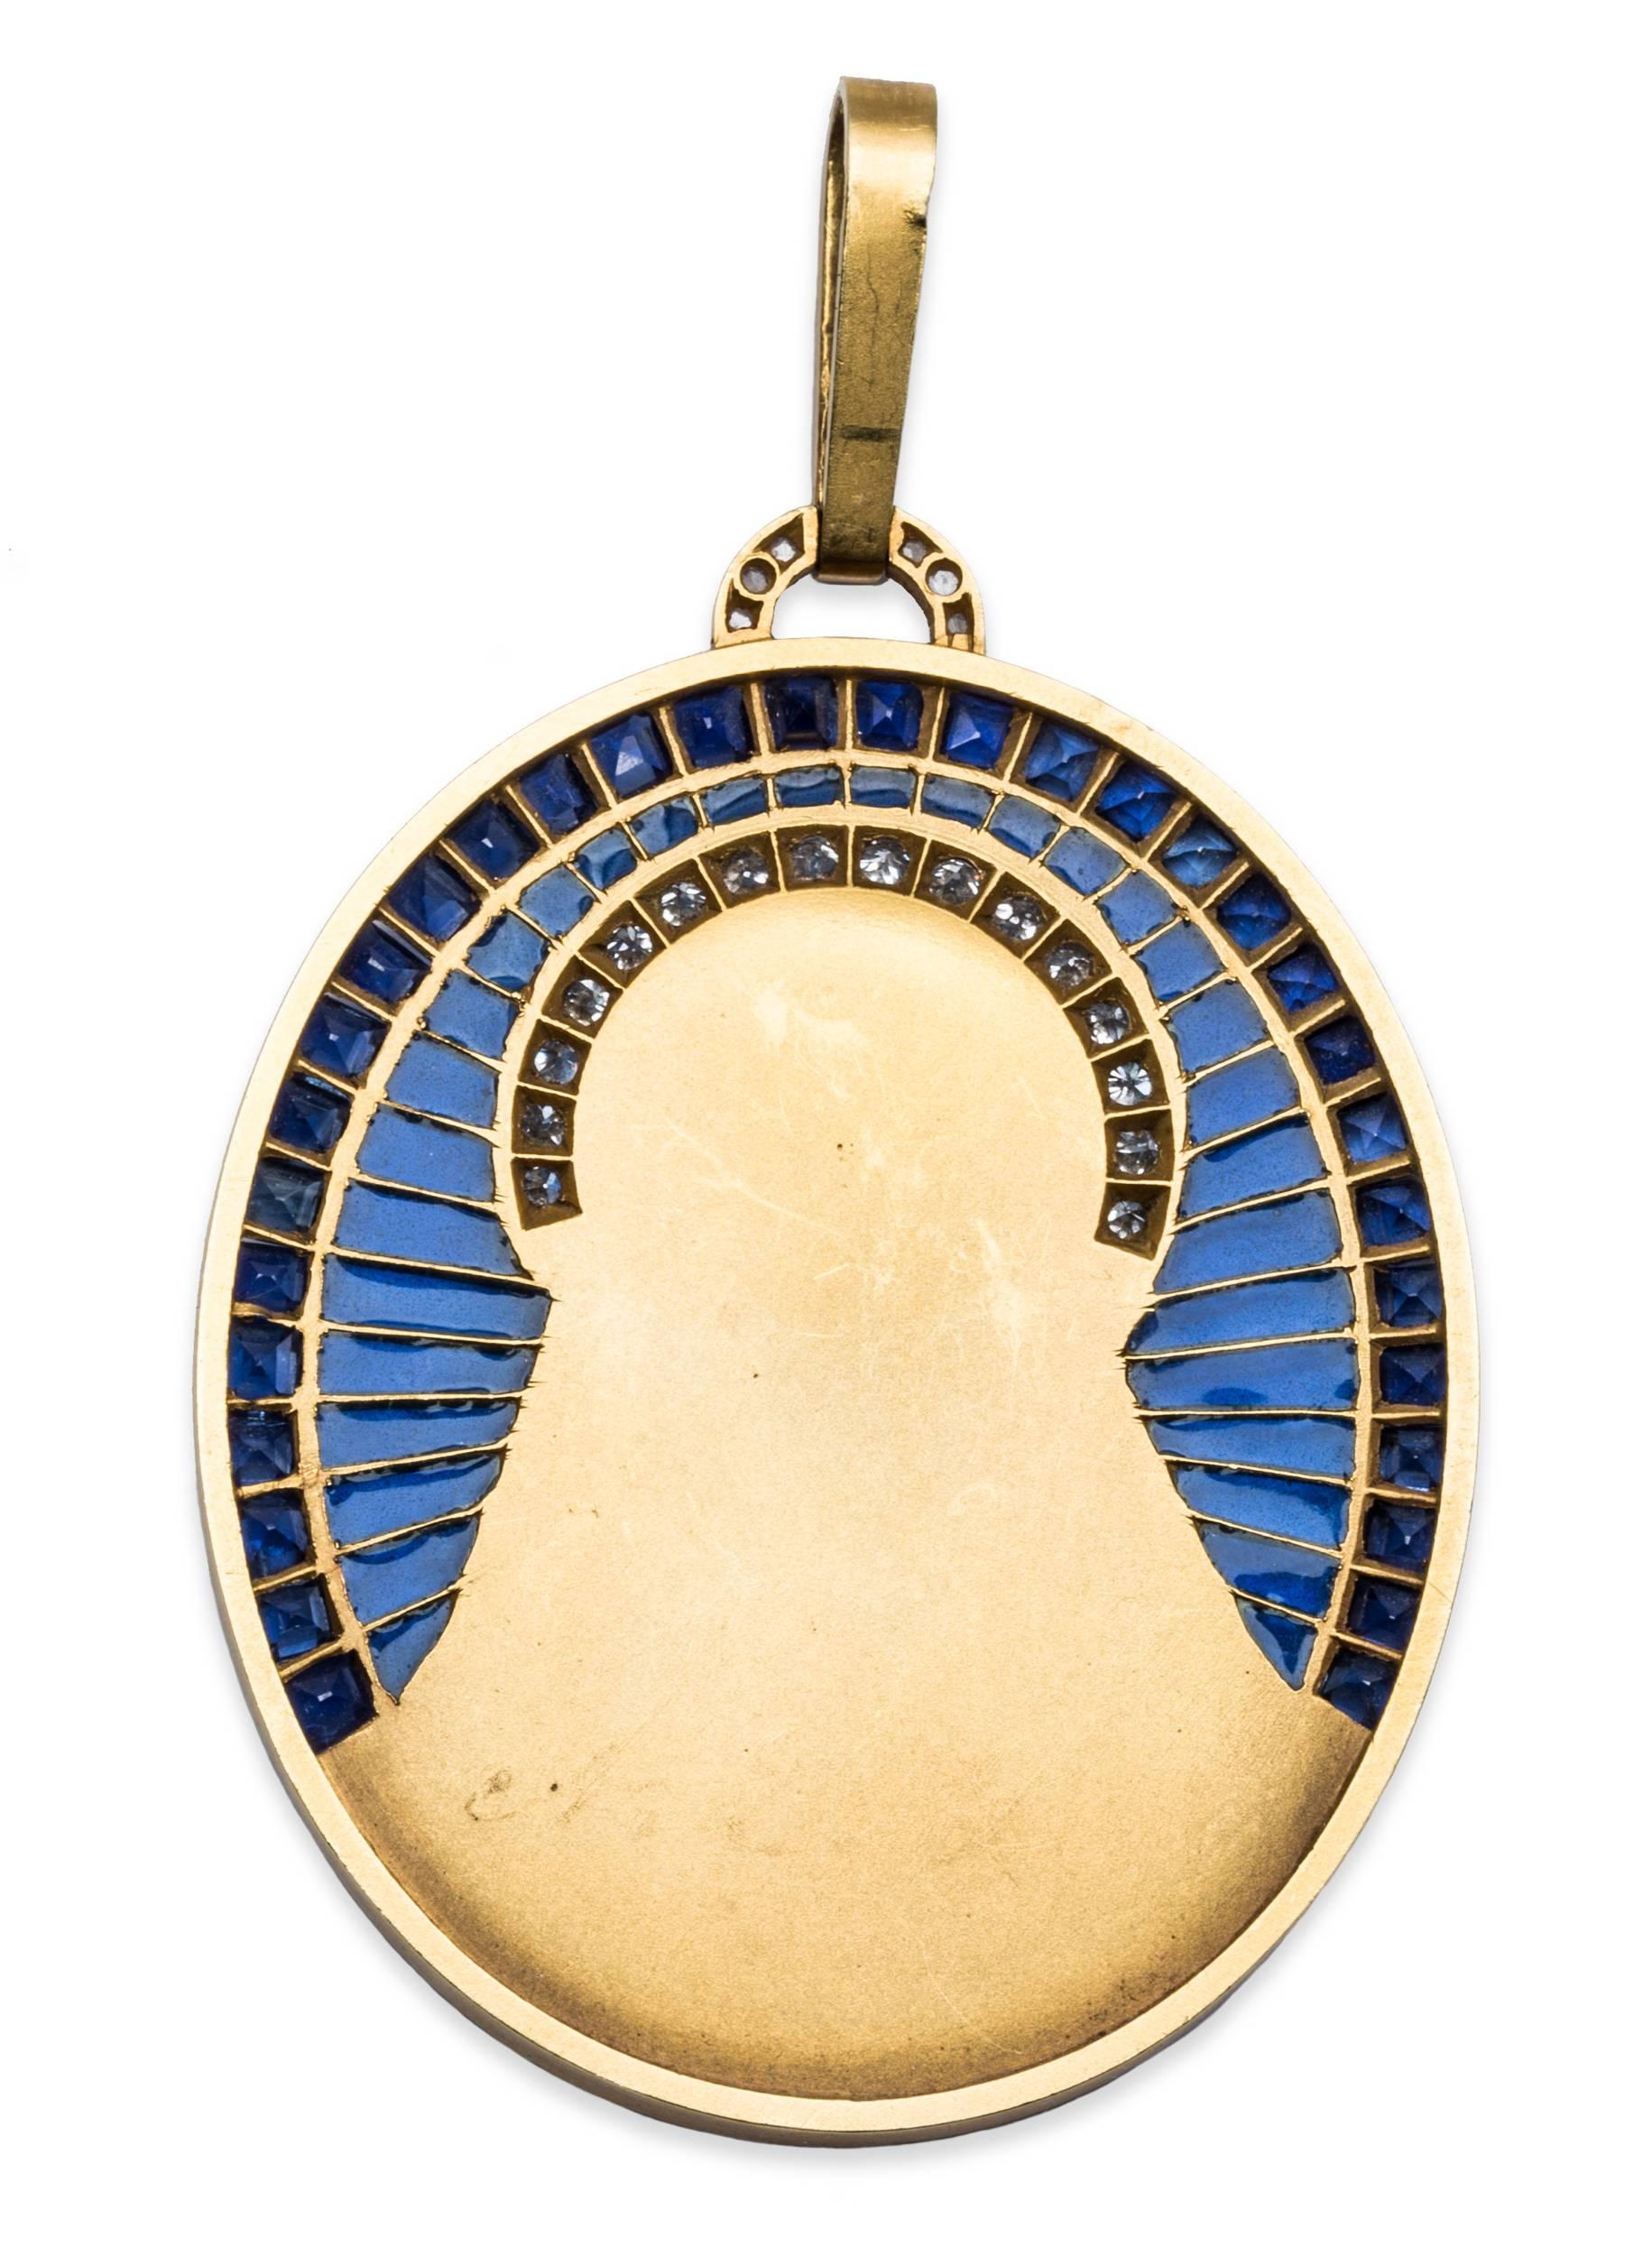 Madonna pendant, centering a finely carved depiction of the Madonna at prayer in 18k yellow gold, with a diamond-set halo, surrounded by a semi-circle of plique-à-jour midnight blue vitreous enamel with the edge set with 32 calibre-cut fitted blue